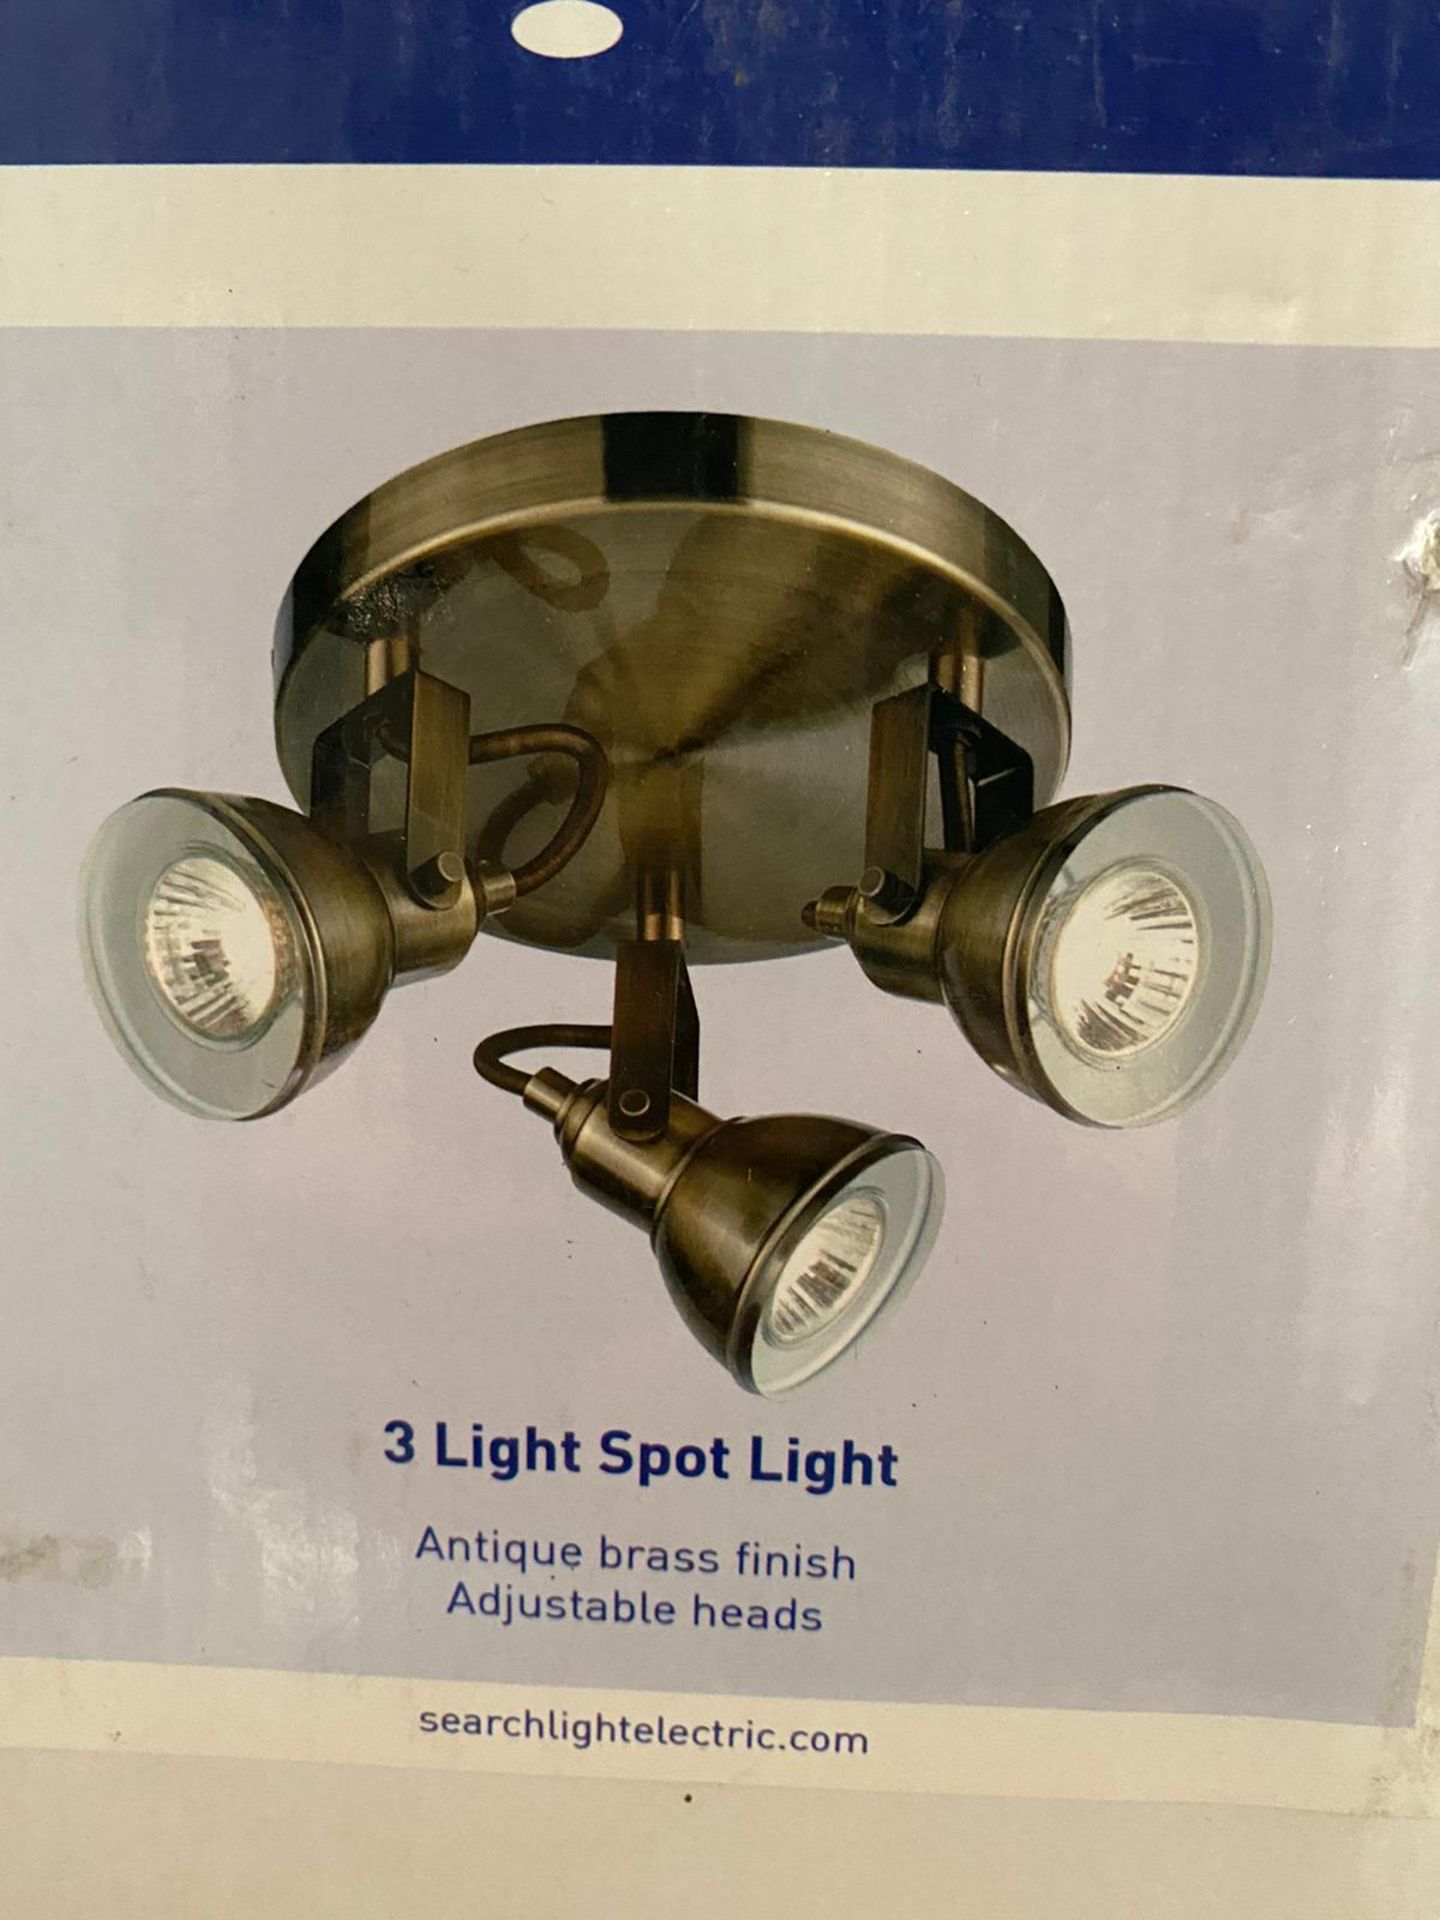 1 x Searchlight 3 Light Spot Light in Antique Brass - Ref: 1543AB - New and Boxed - RRP: £70 - Image 2 of 4